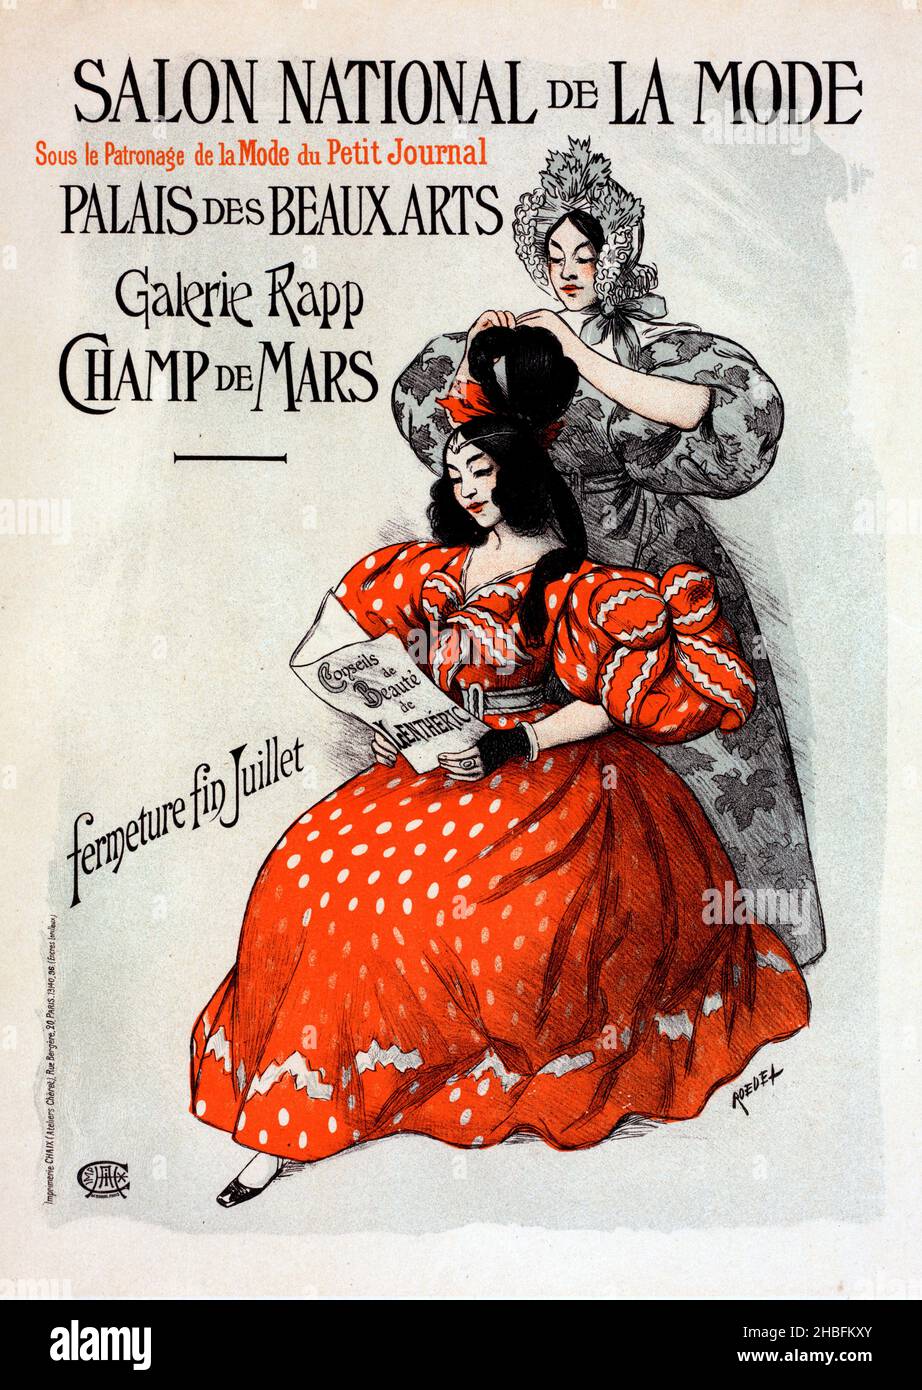 French vintage poster  advertising a „Salon National de la Mode“, a national faschion salon in Paris, France by Roedel, 1900 Stock Photo